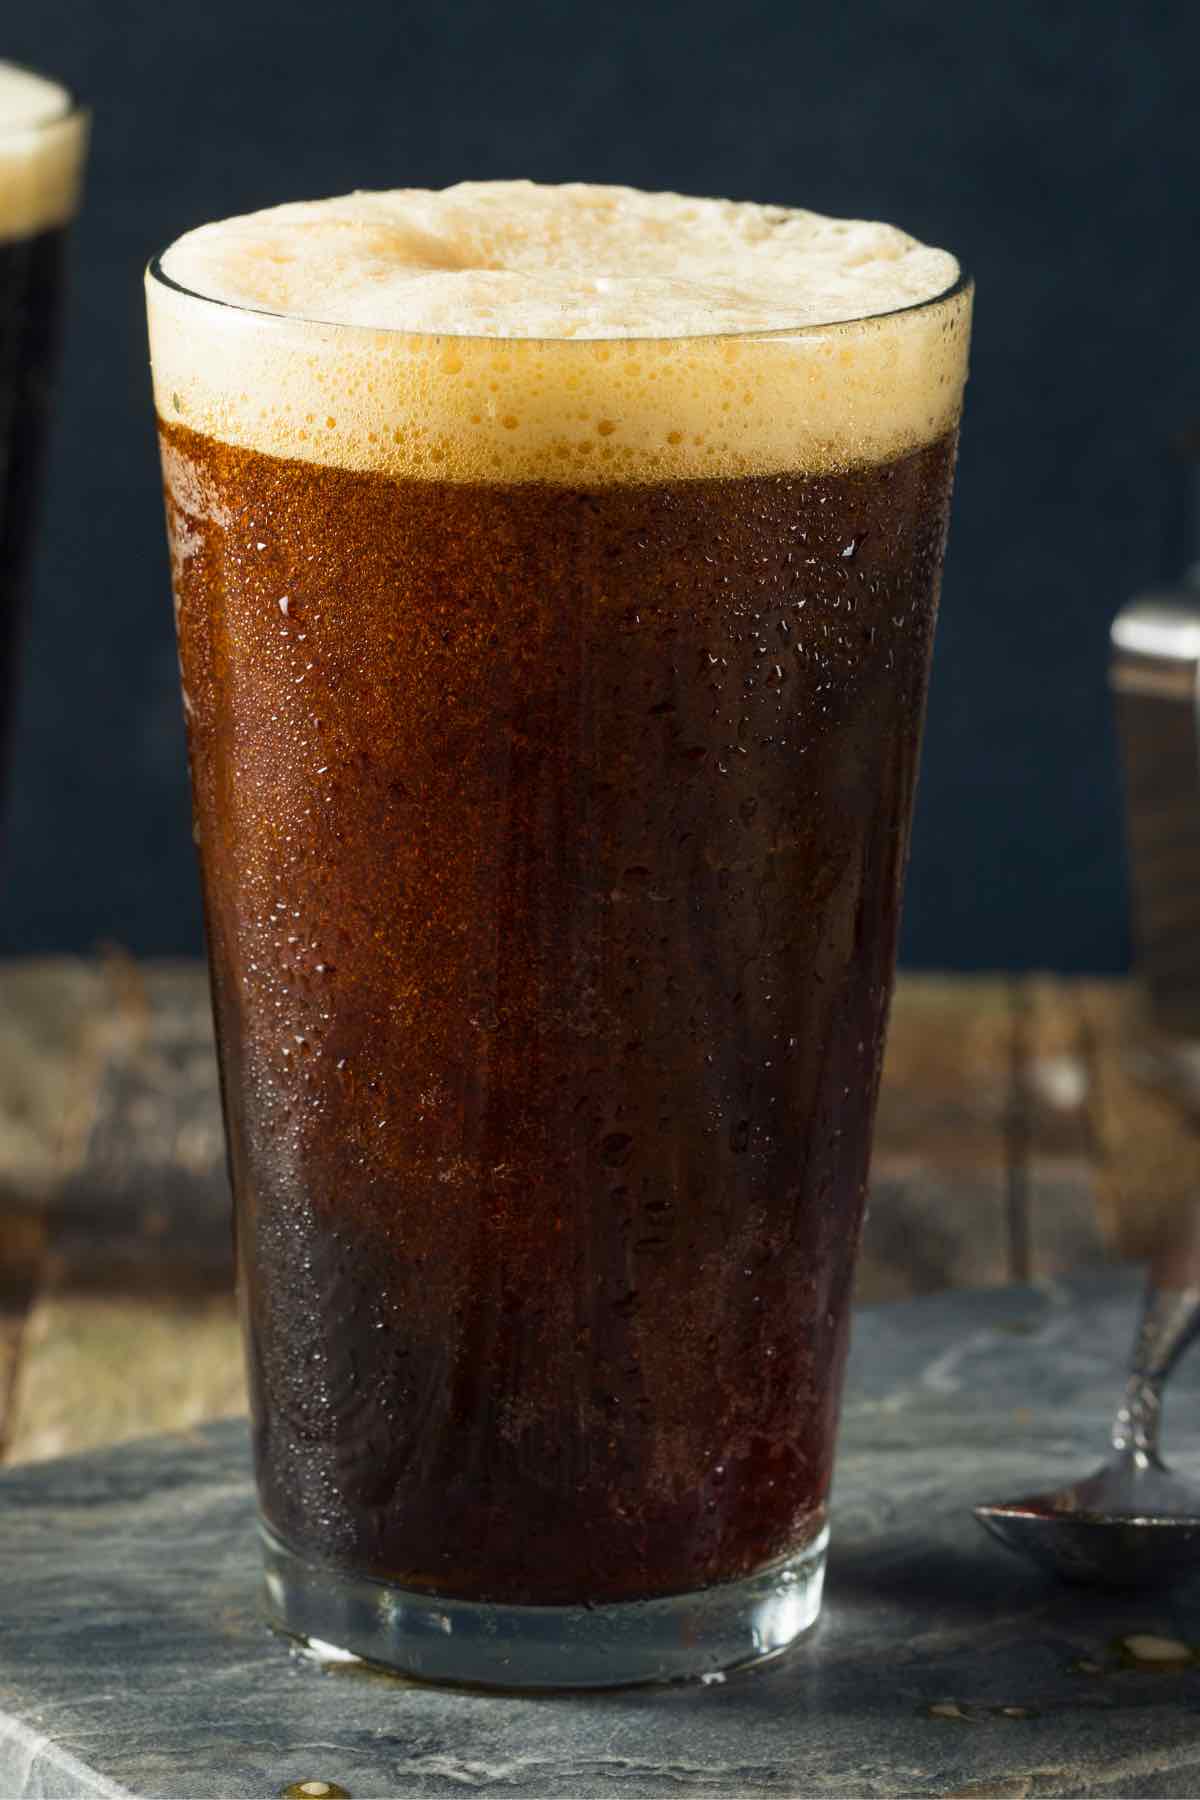 It’s the coolest cold brew you can find! In recent years, Nitro Cold Brew has become an incredibly popular item at coffee shops and grocery stores. This unique kind of coffee is infused with nitrogen, which helps to improve its taste and texture. Nitro coffee is a menu item at Starbucks, but it can be easily recreated at home.